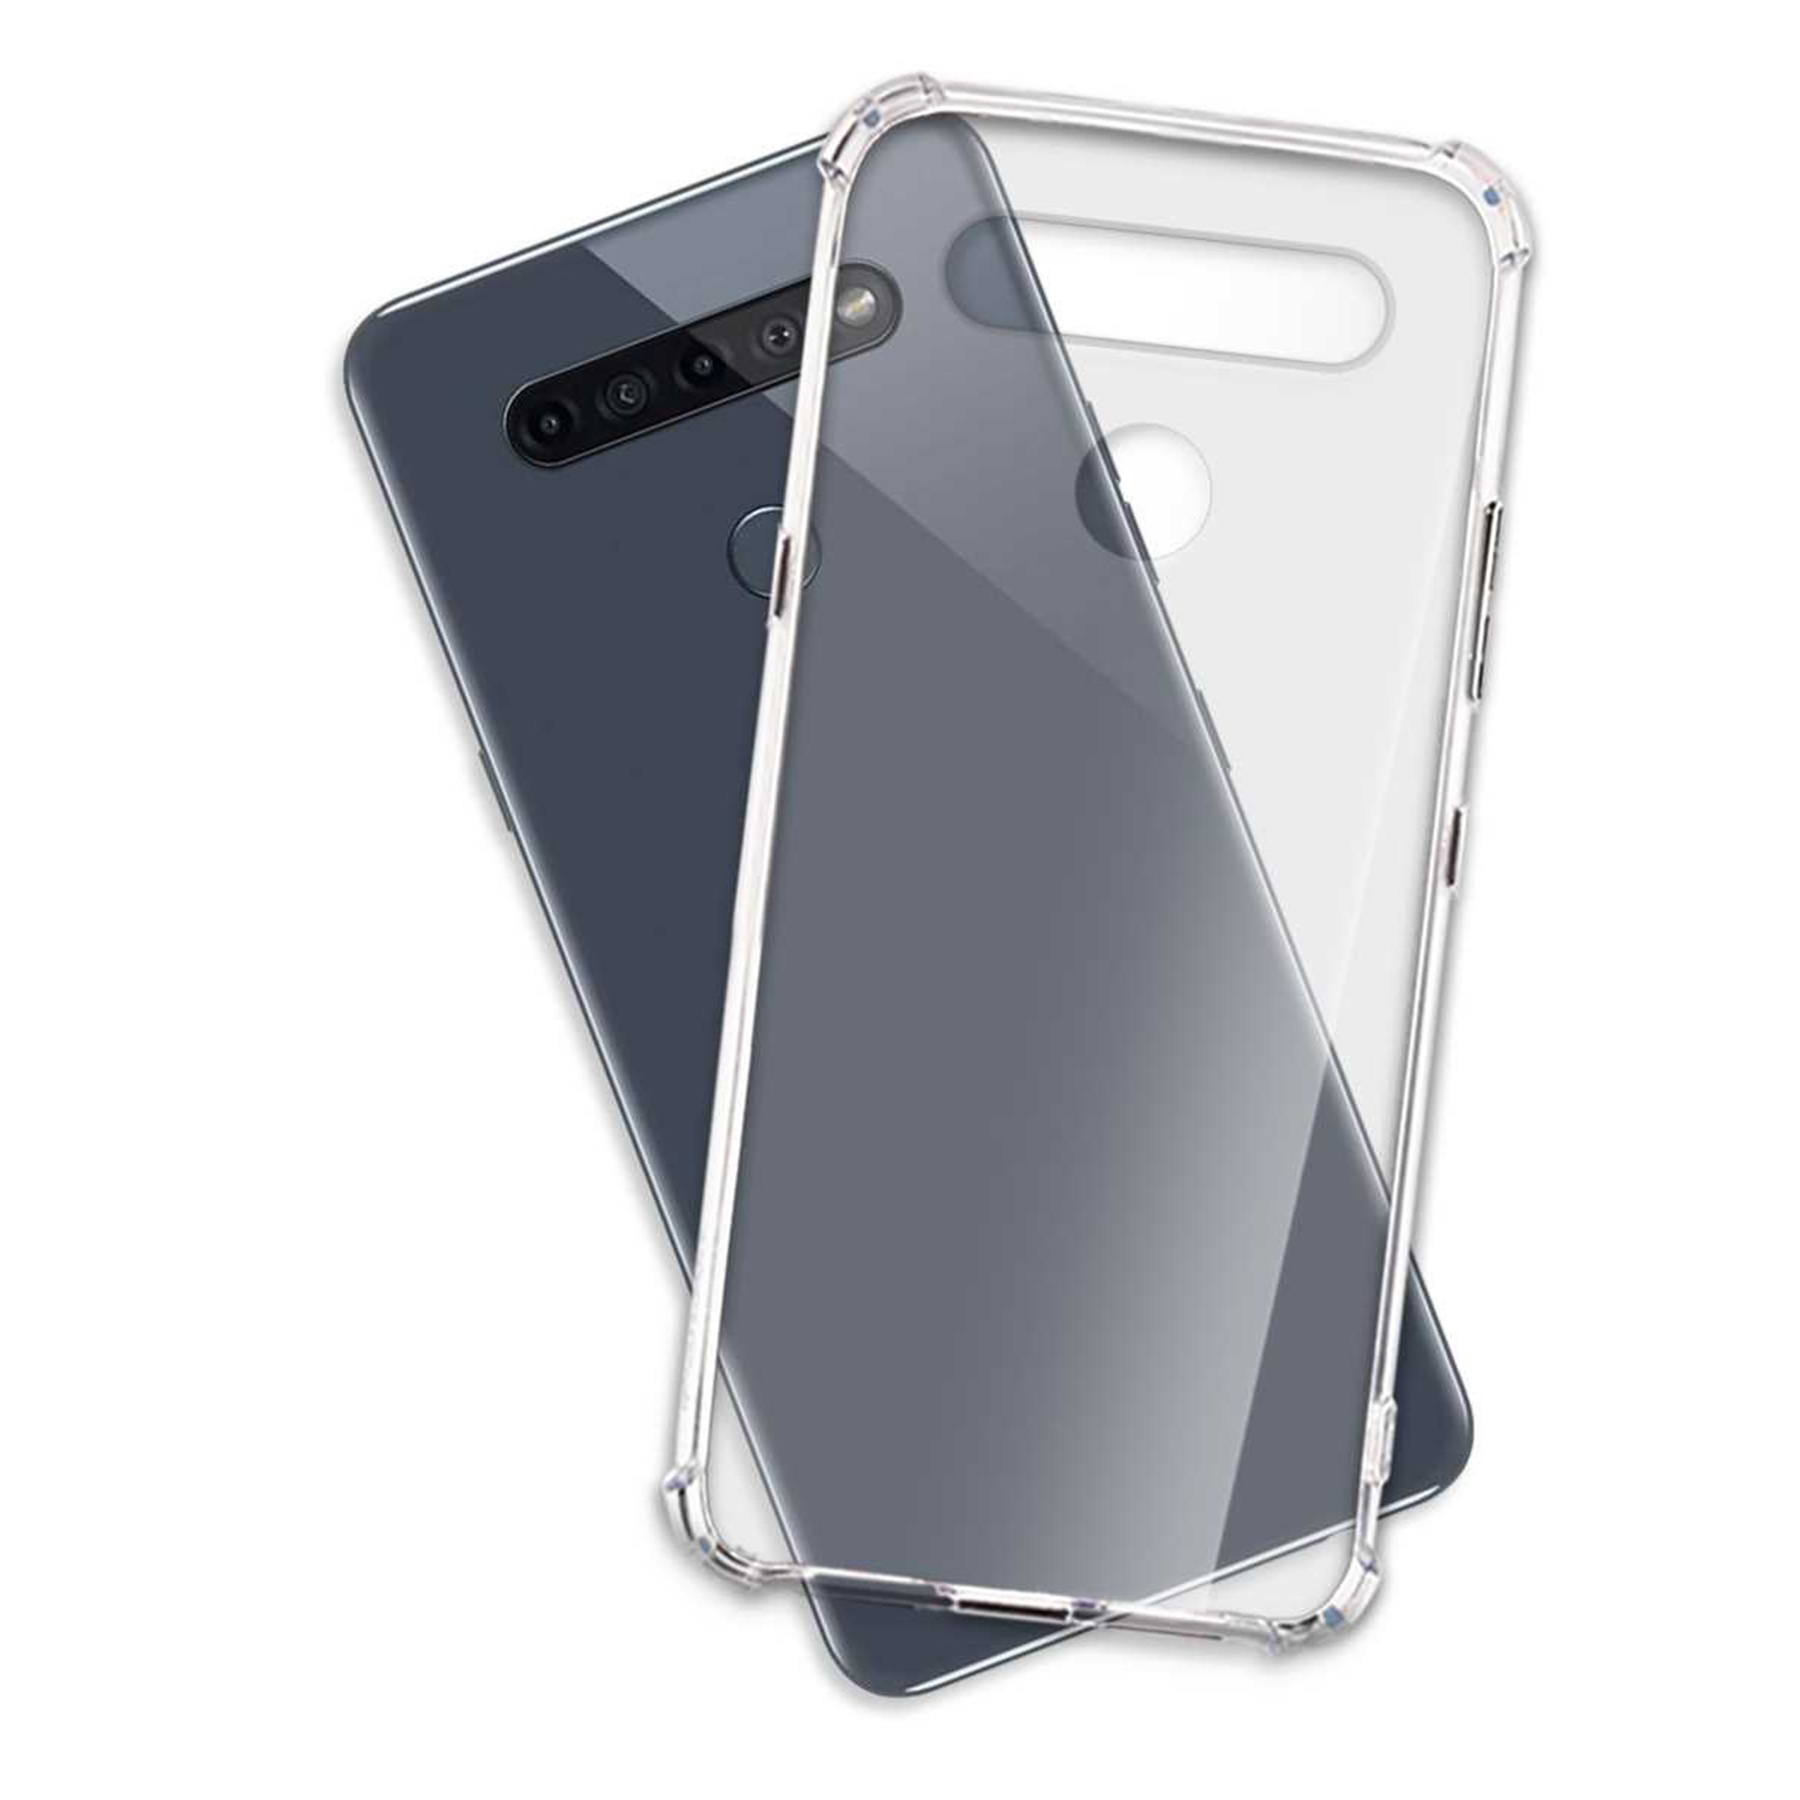 MTB MORE K51S, Transparent Case, Clear LG, ENERGY Armor Backcover